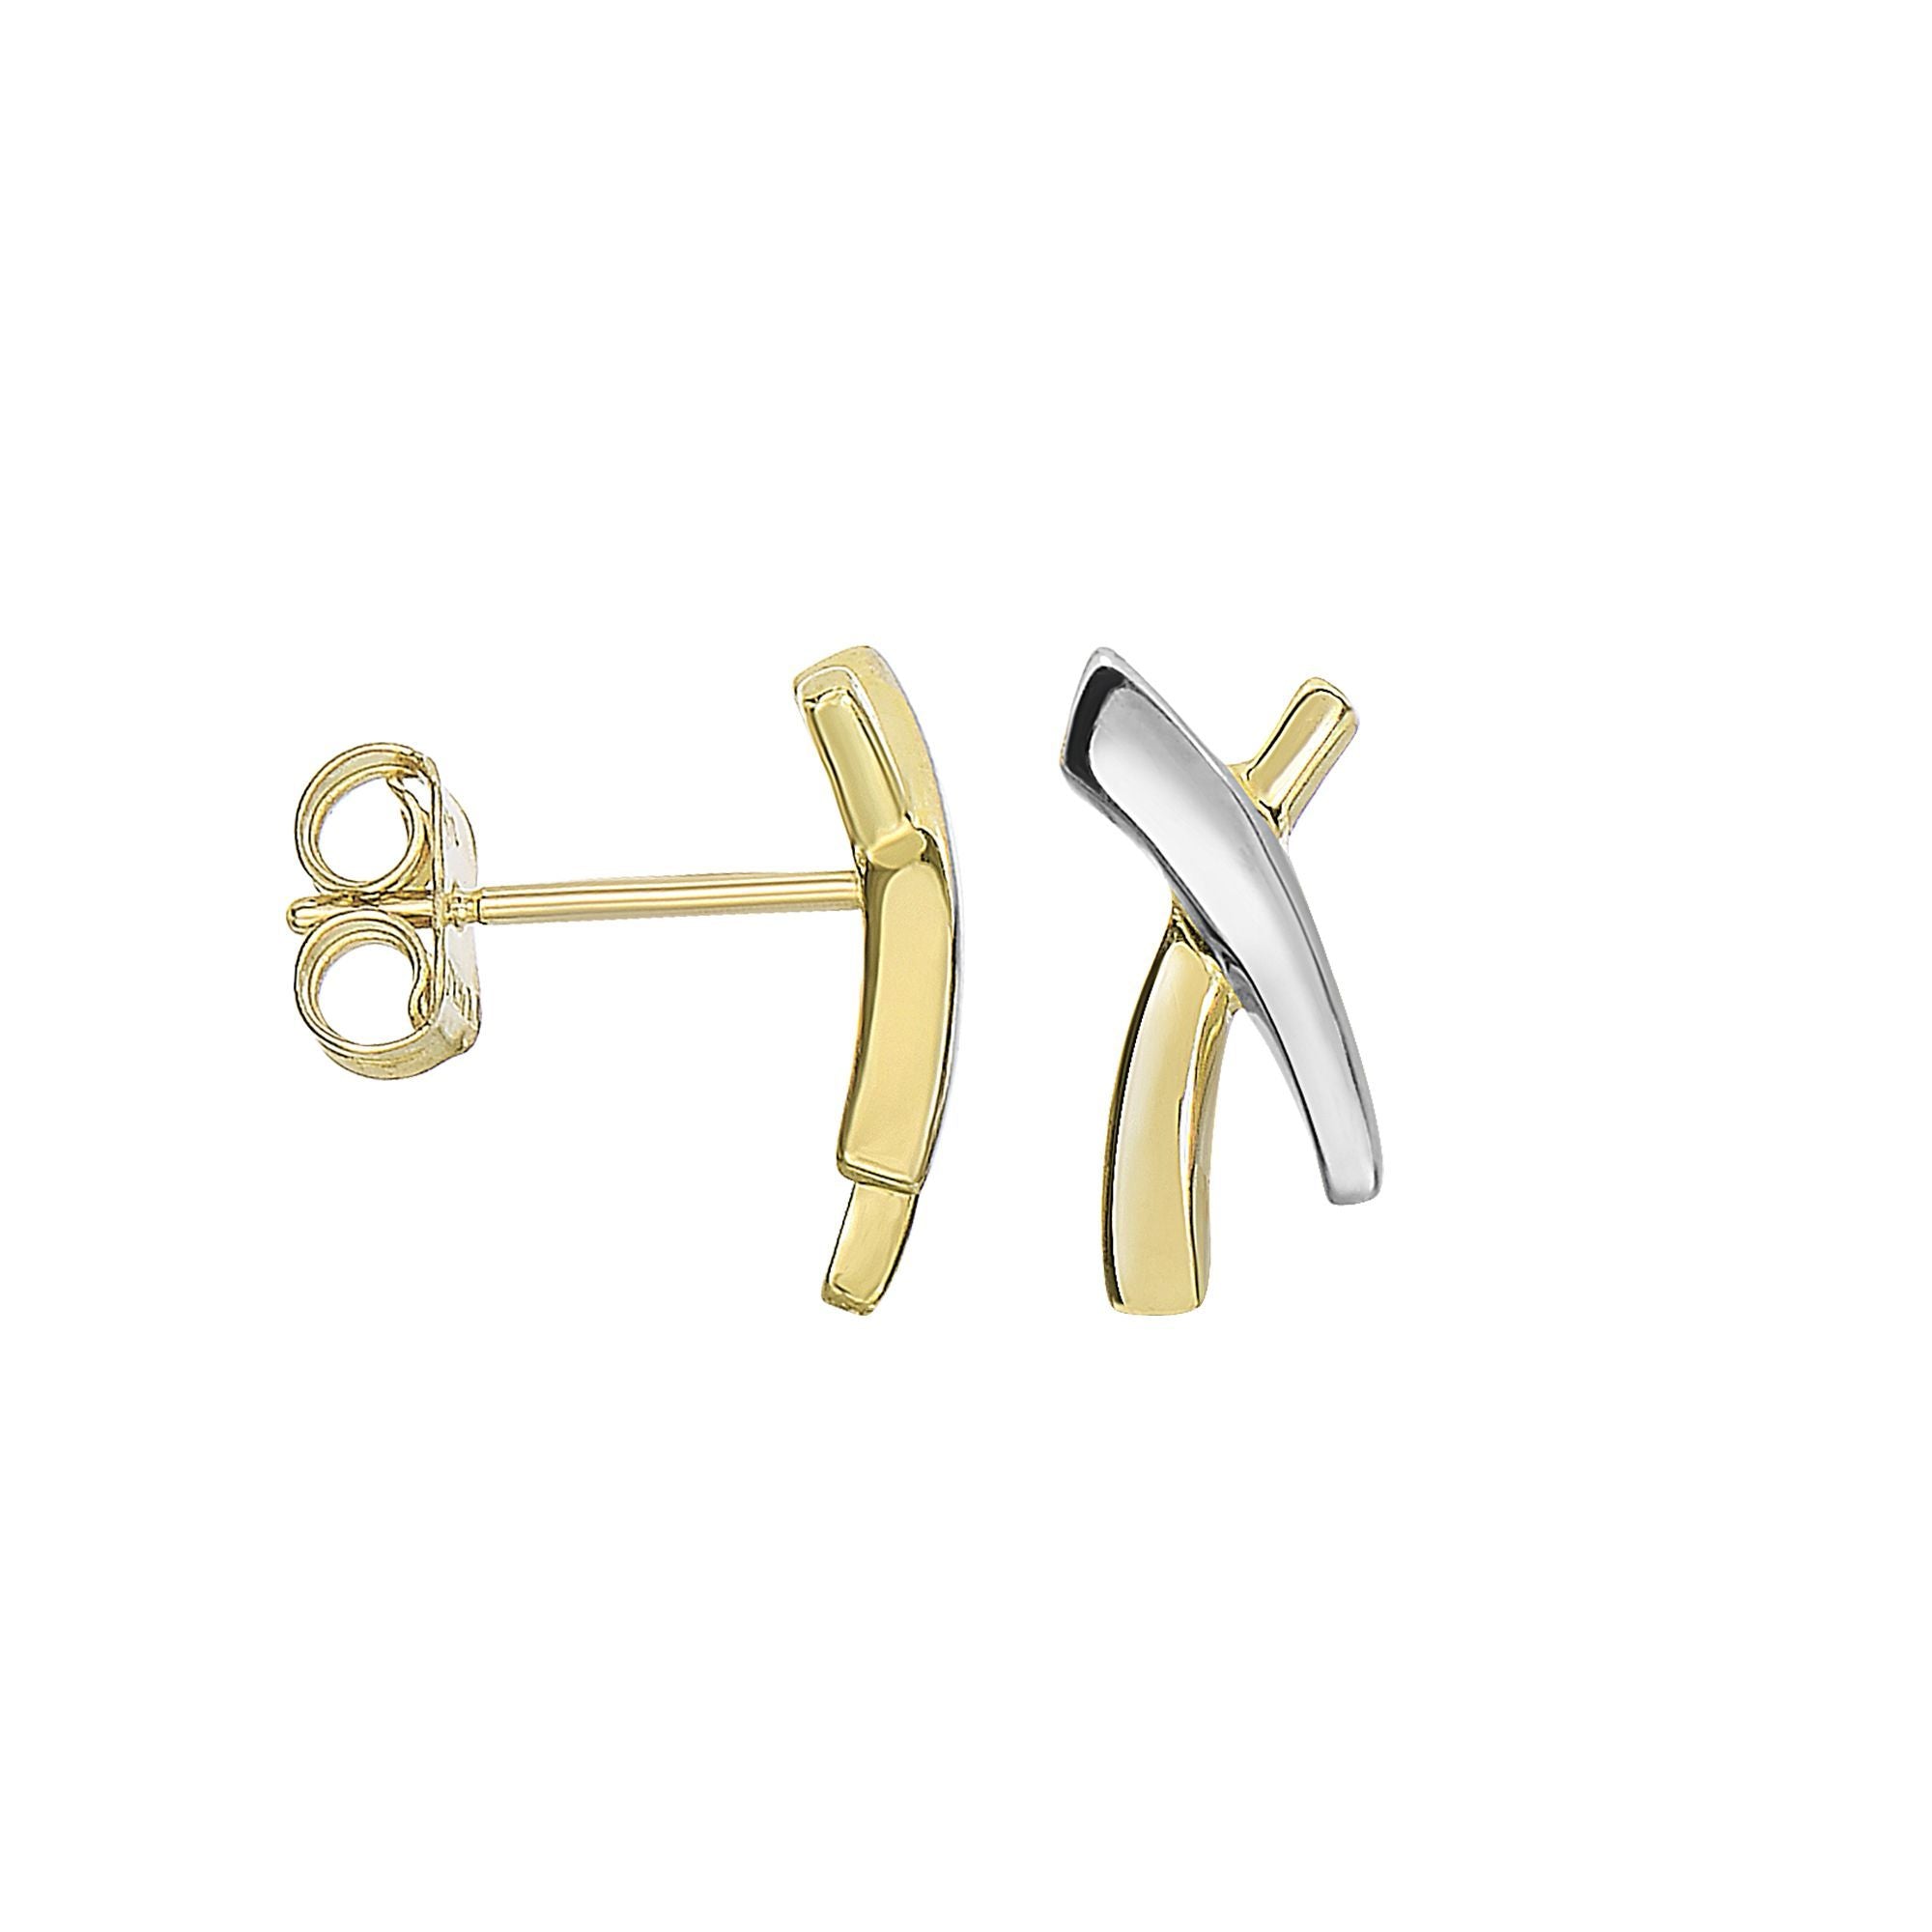 Shiny Solid Gold Convex X Stud Push Back Earrings - wingroupjewelry